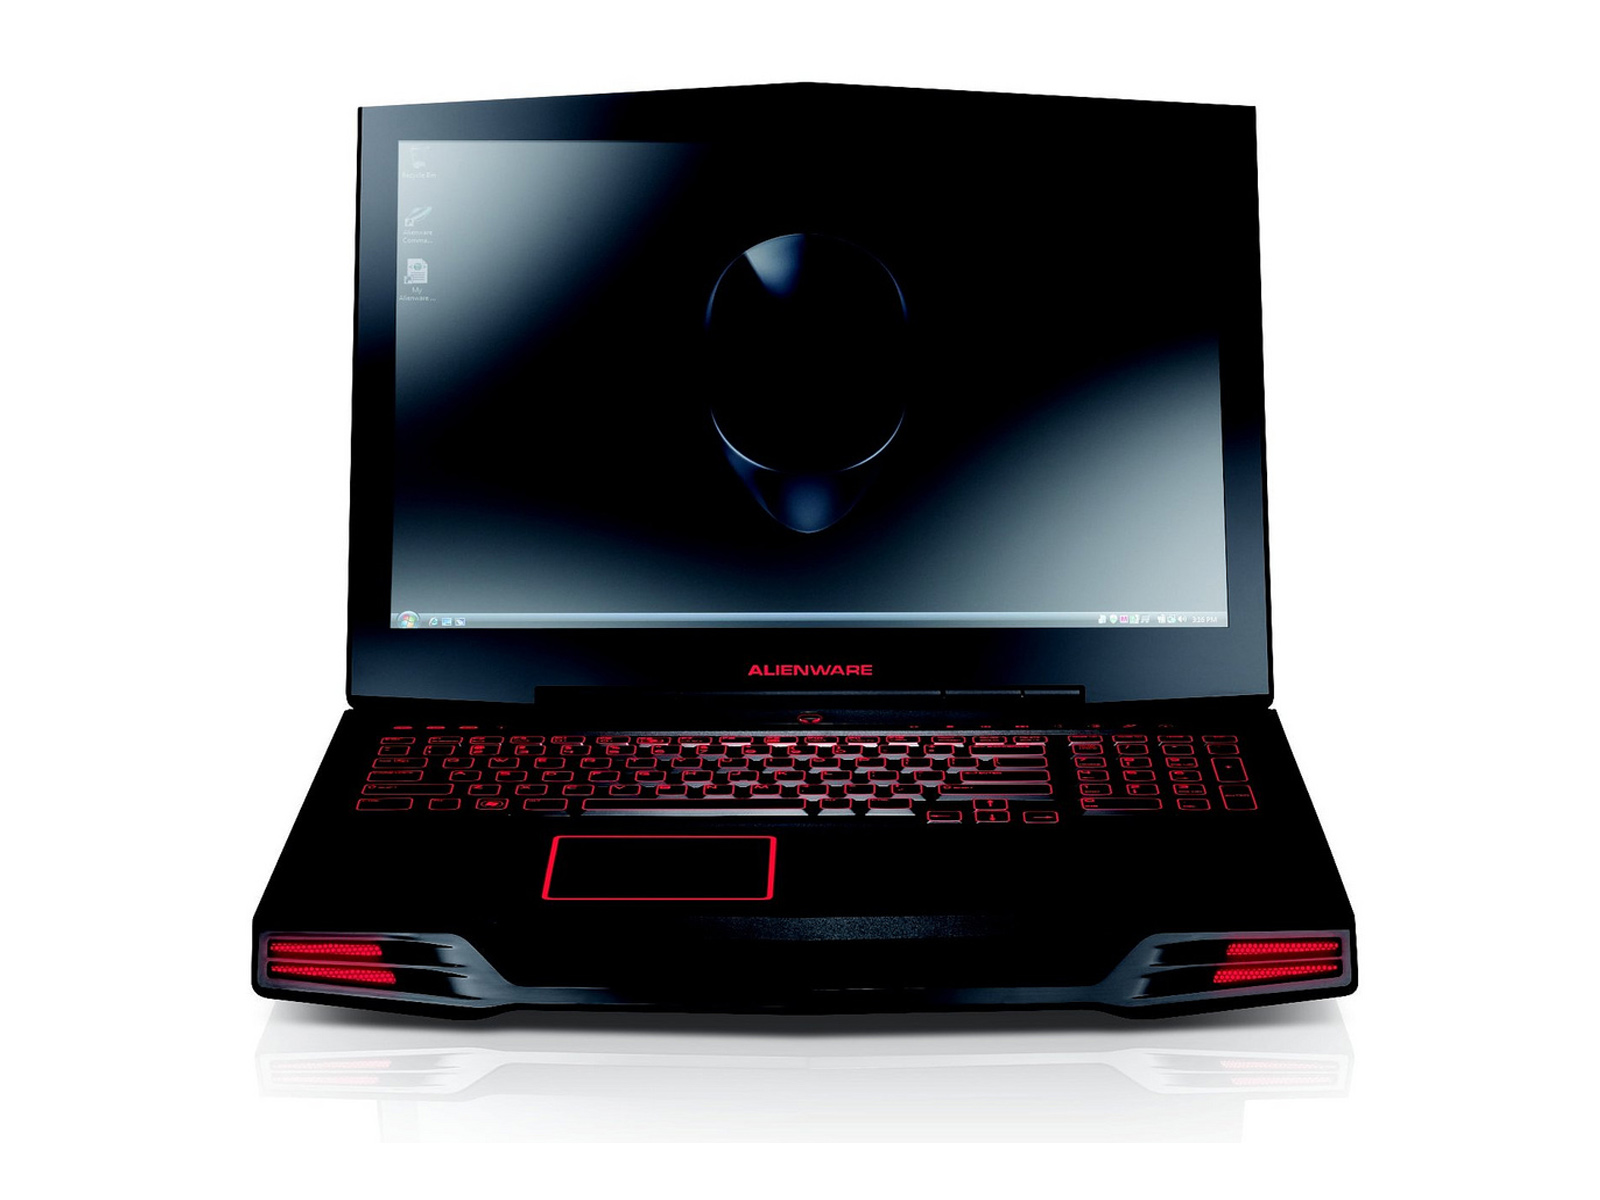 Name Alienware Laptop Wallpaper Posted Piph Category Puters Added